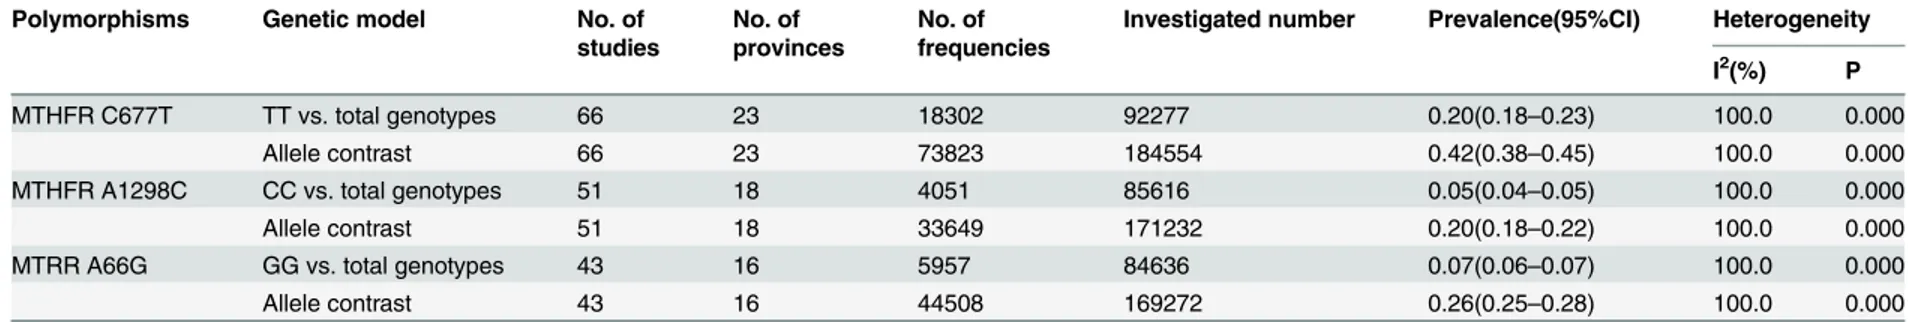 Table 4. Summarized prevalence with 95% confidence intervals of genetic polymorphisms in the folate pathway among Chinese populations.